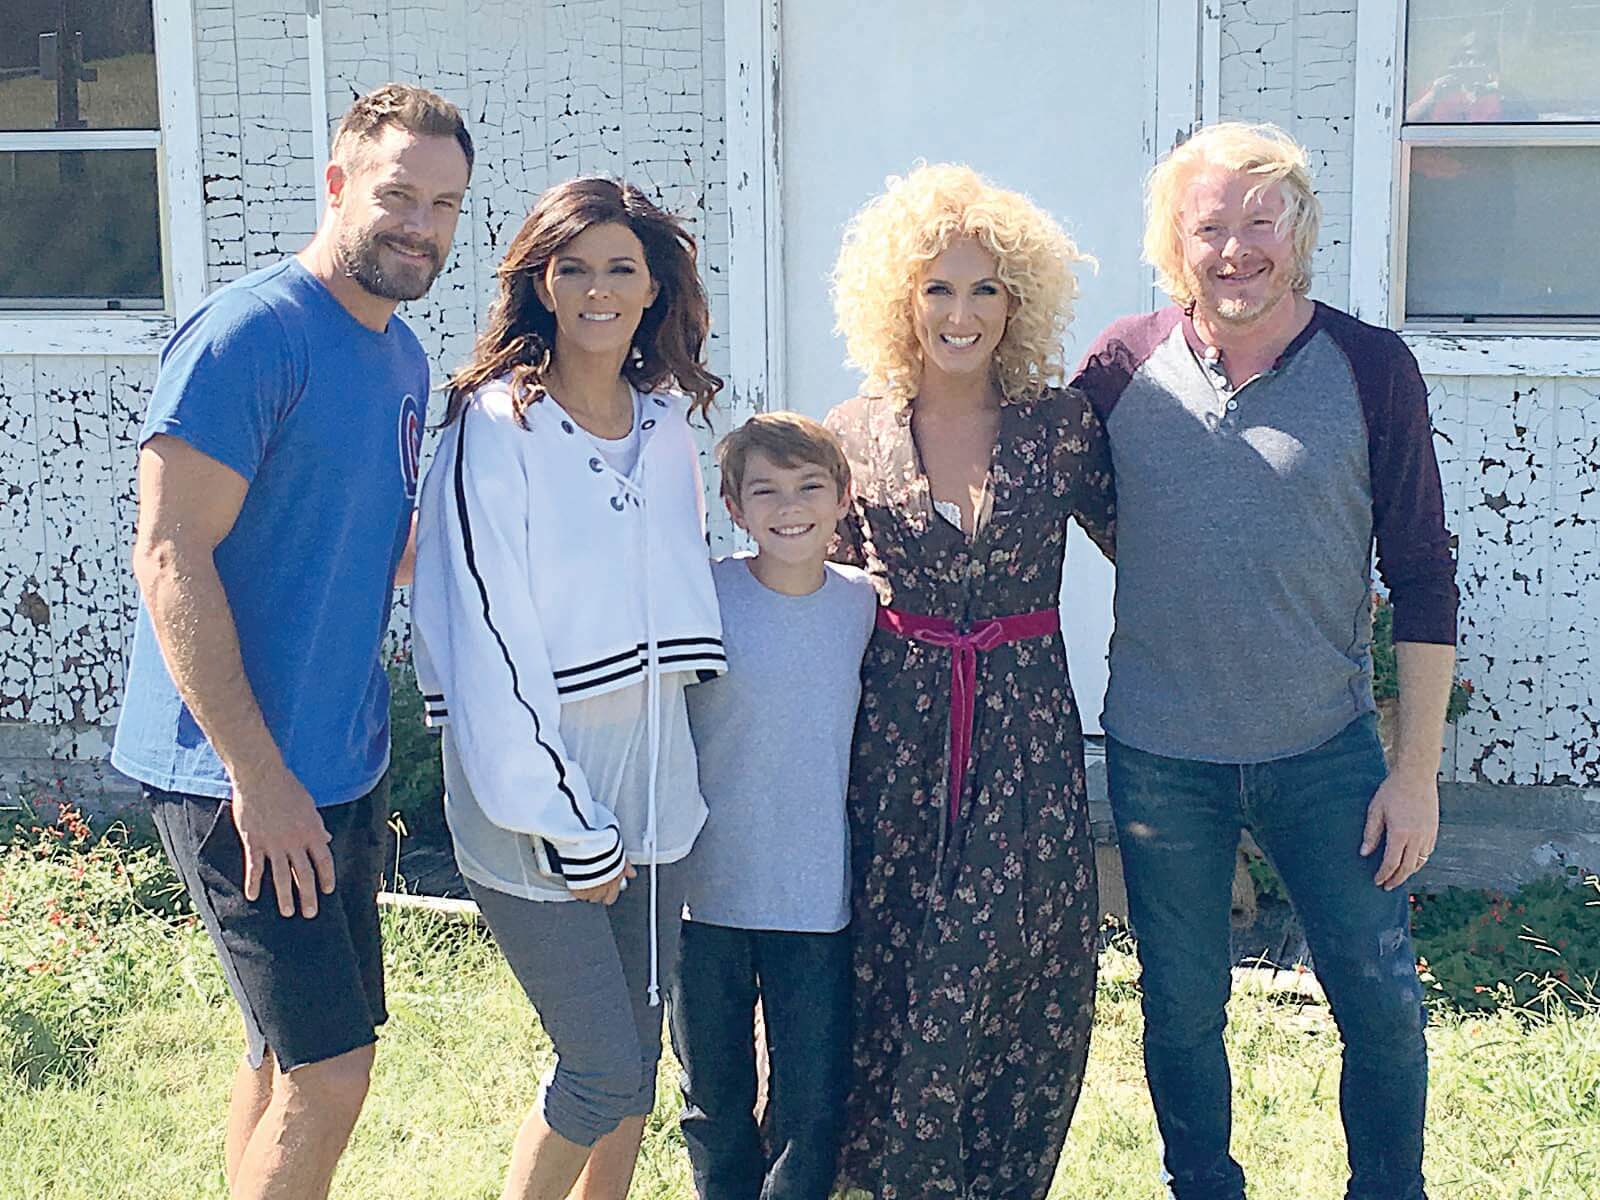 Joe Ray, center, joins the country music band, Little Big Town, in their new video, “Better Man.” Left to right are Jimi Westbrook, Karen Fairchild, Joe, Kimberly Schlapman and Phillip Sweet.